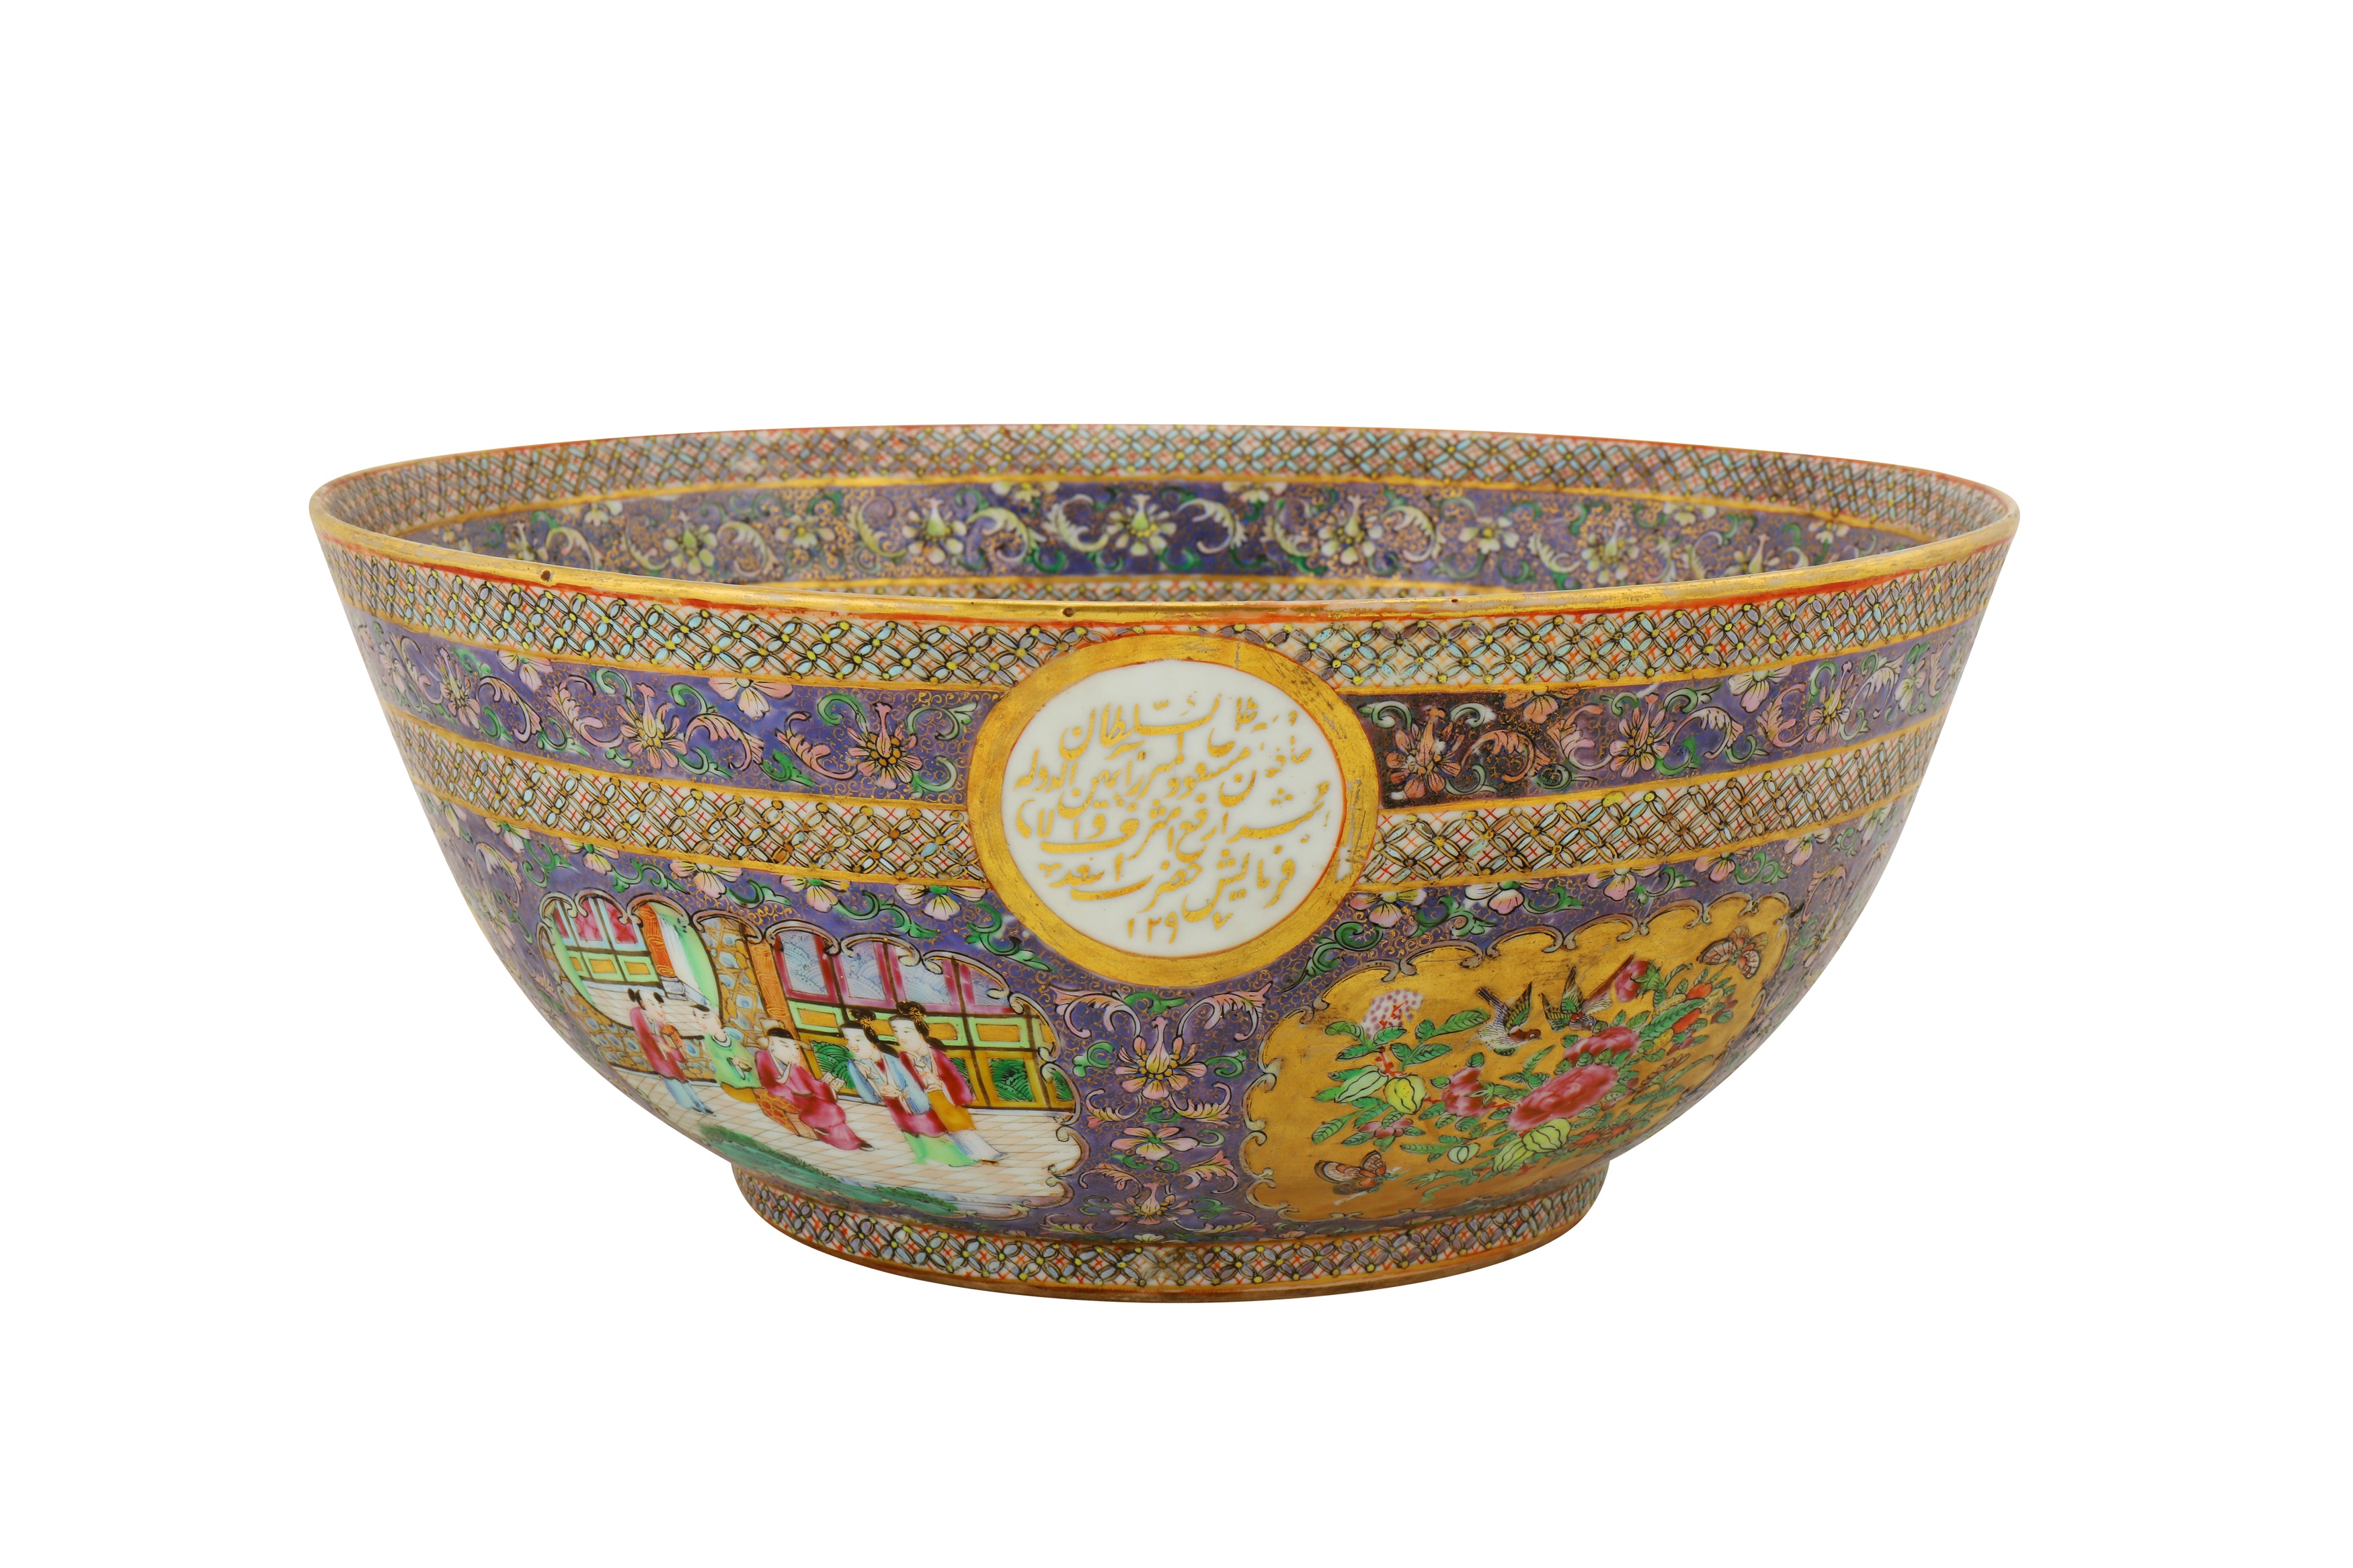 A LARGE BOWL AND DISH FROM THE ZILL AL-SULTAN CANTON PORCELAIN SERVICE - Image 5 of 8